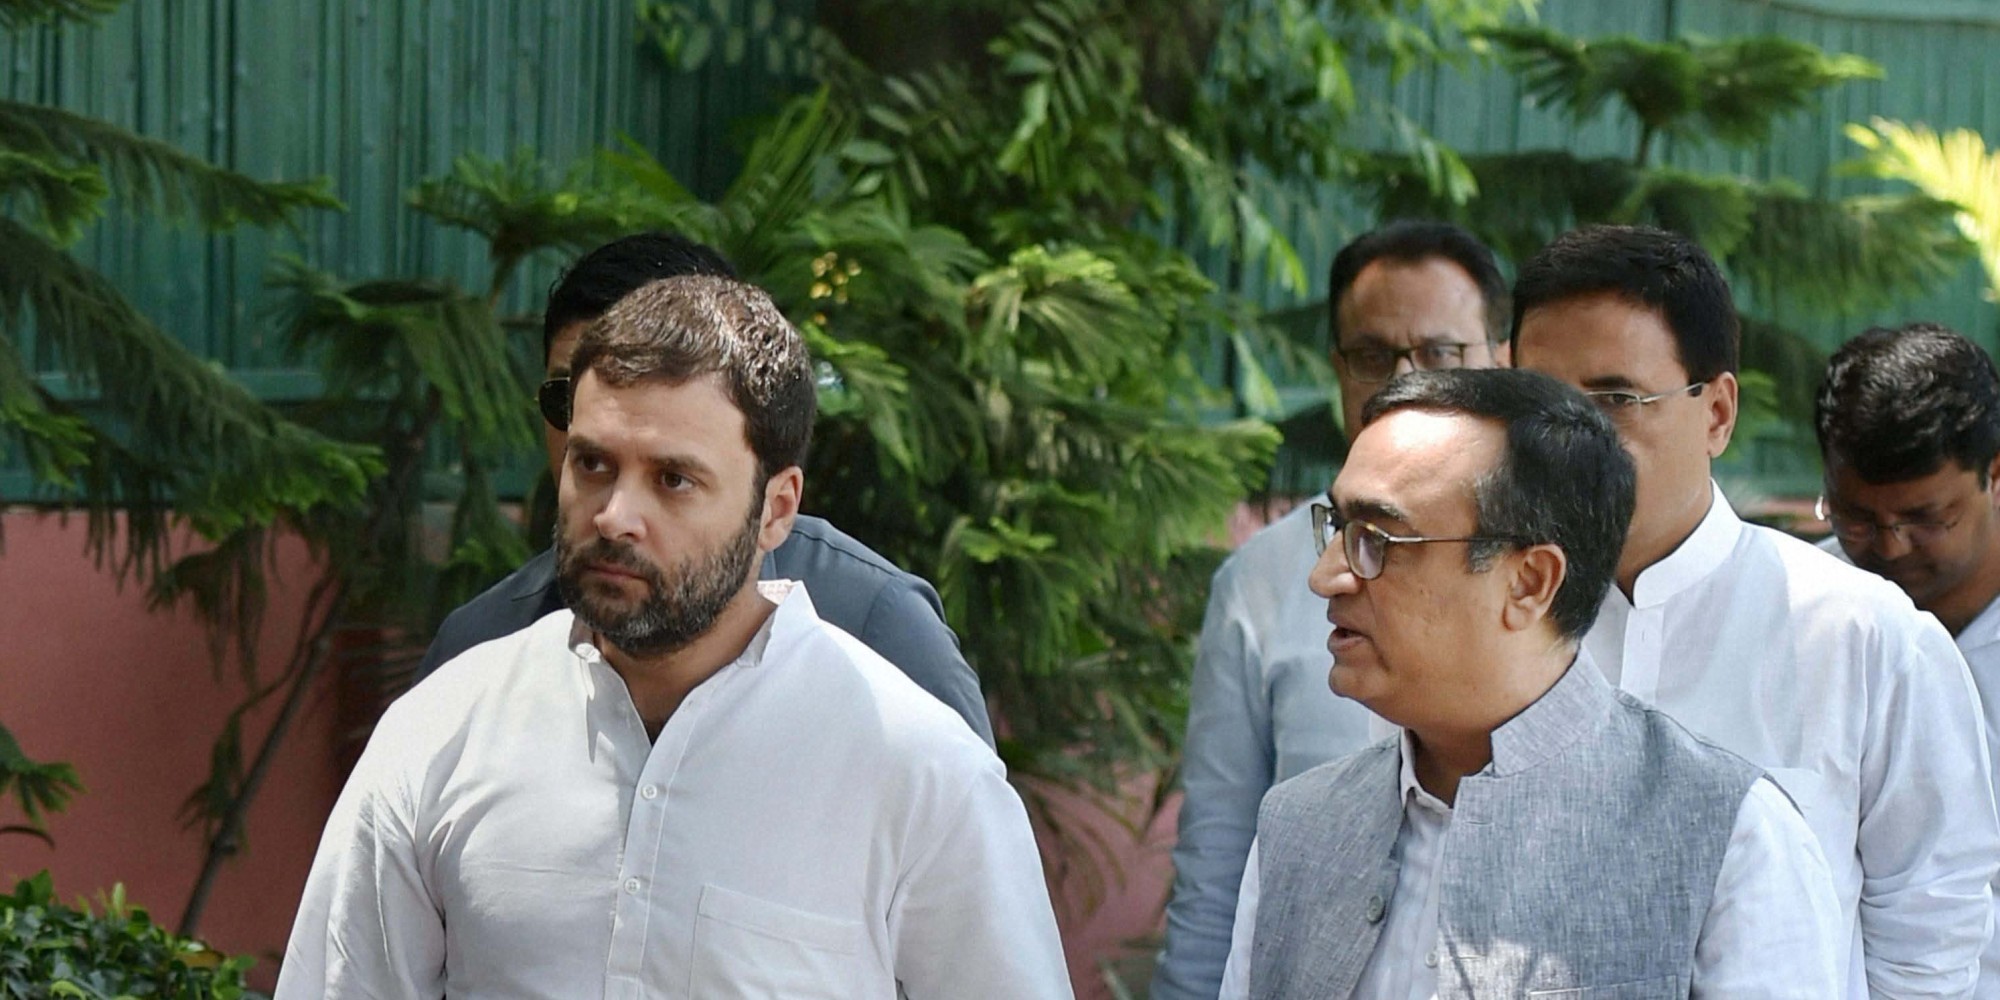 Rahul Gandhi Finally Logs Onto Twitter, Unclear If He Will Tweet Or His Office Will